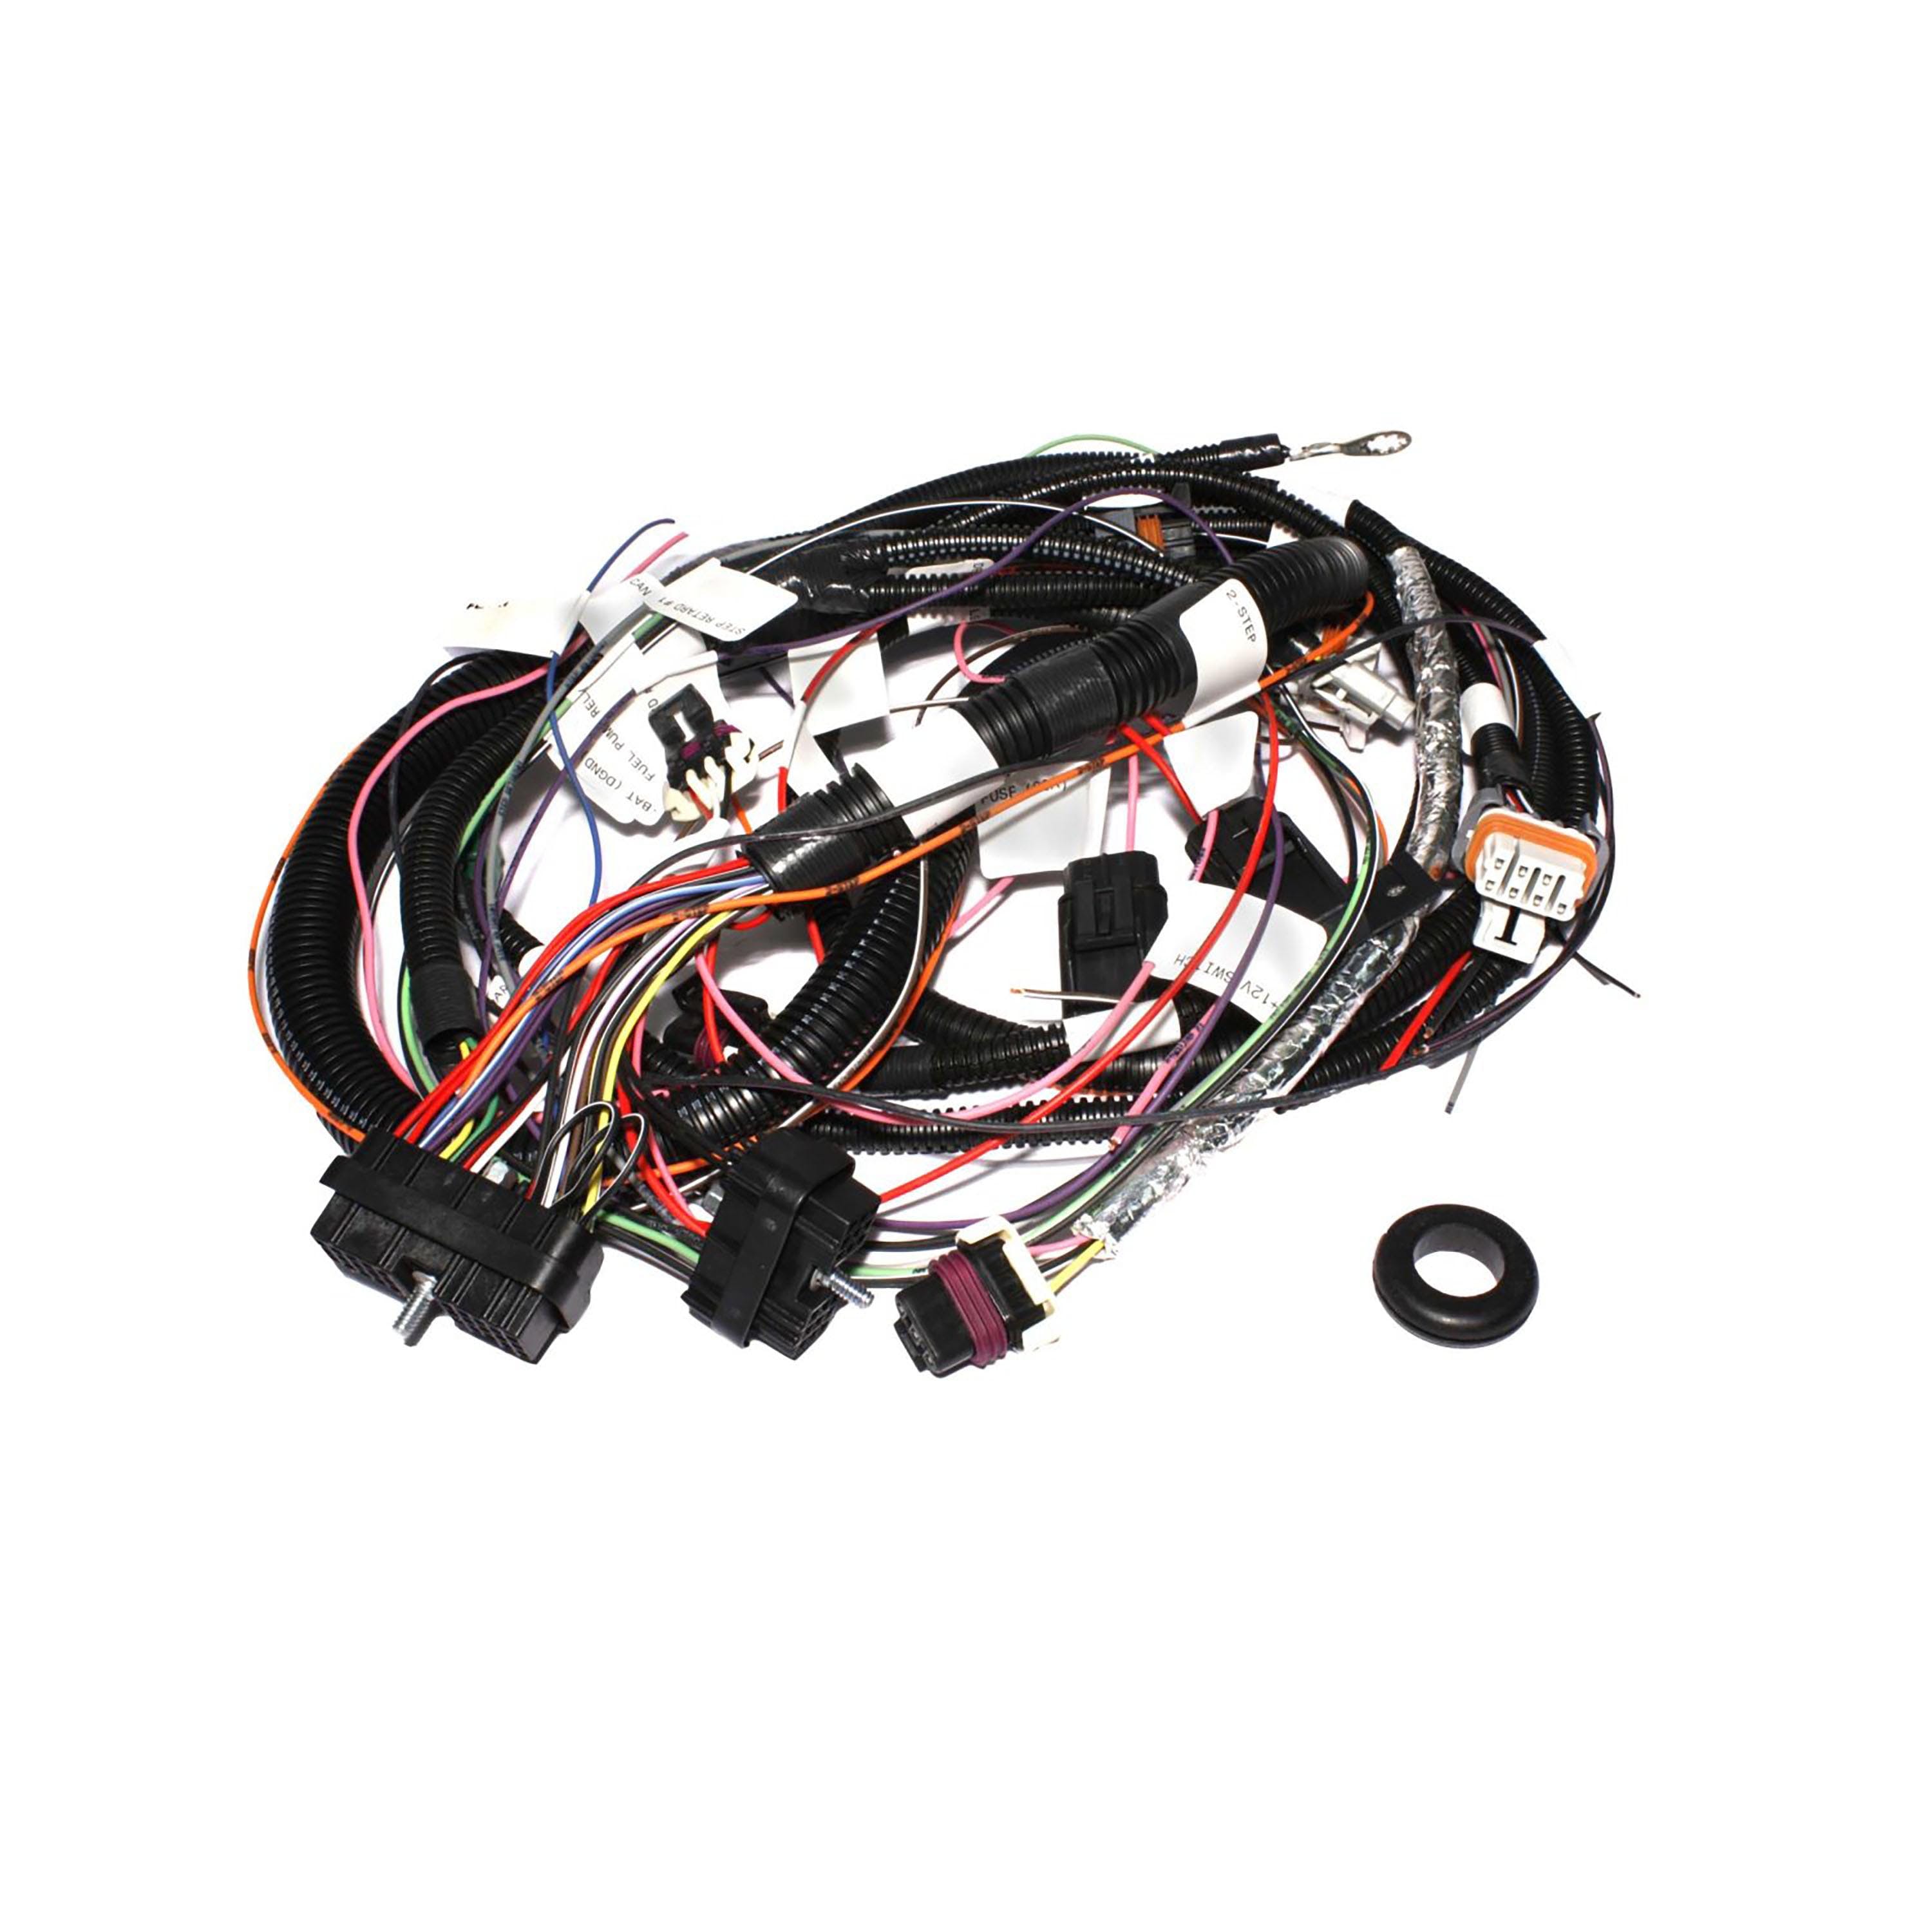 FAST - Fuel Air Spark Technology 301972 Wiring Harness for LS1/LS6 XIM